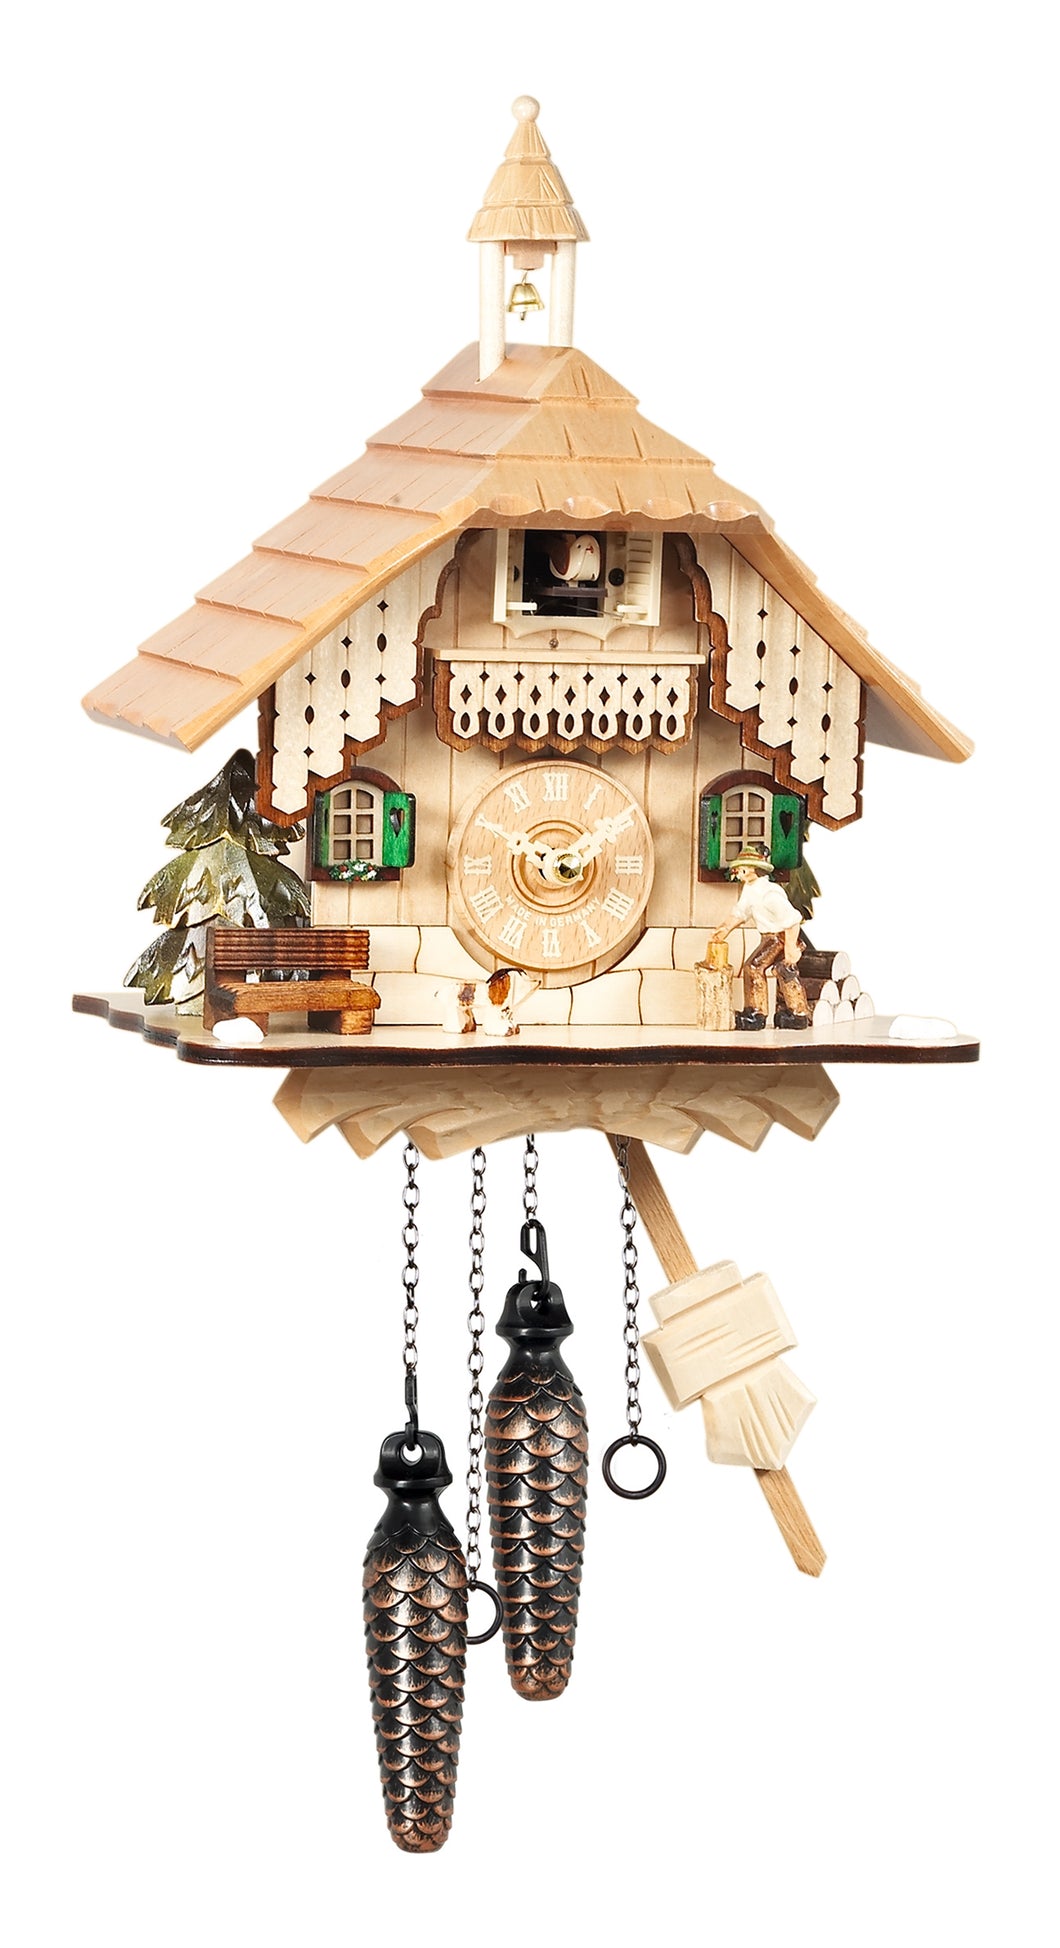 NEW - Chalet Cuckoo with Moving Wood Chopper (light wood color)